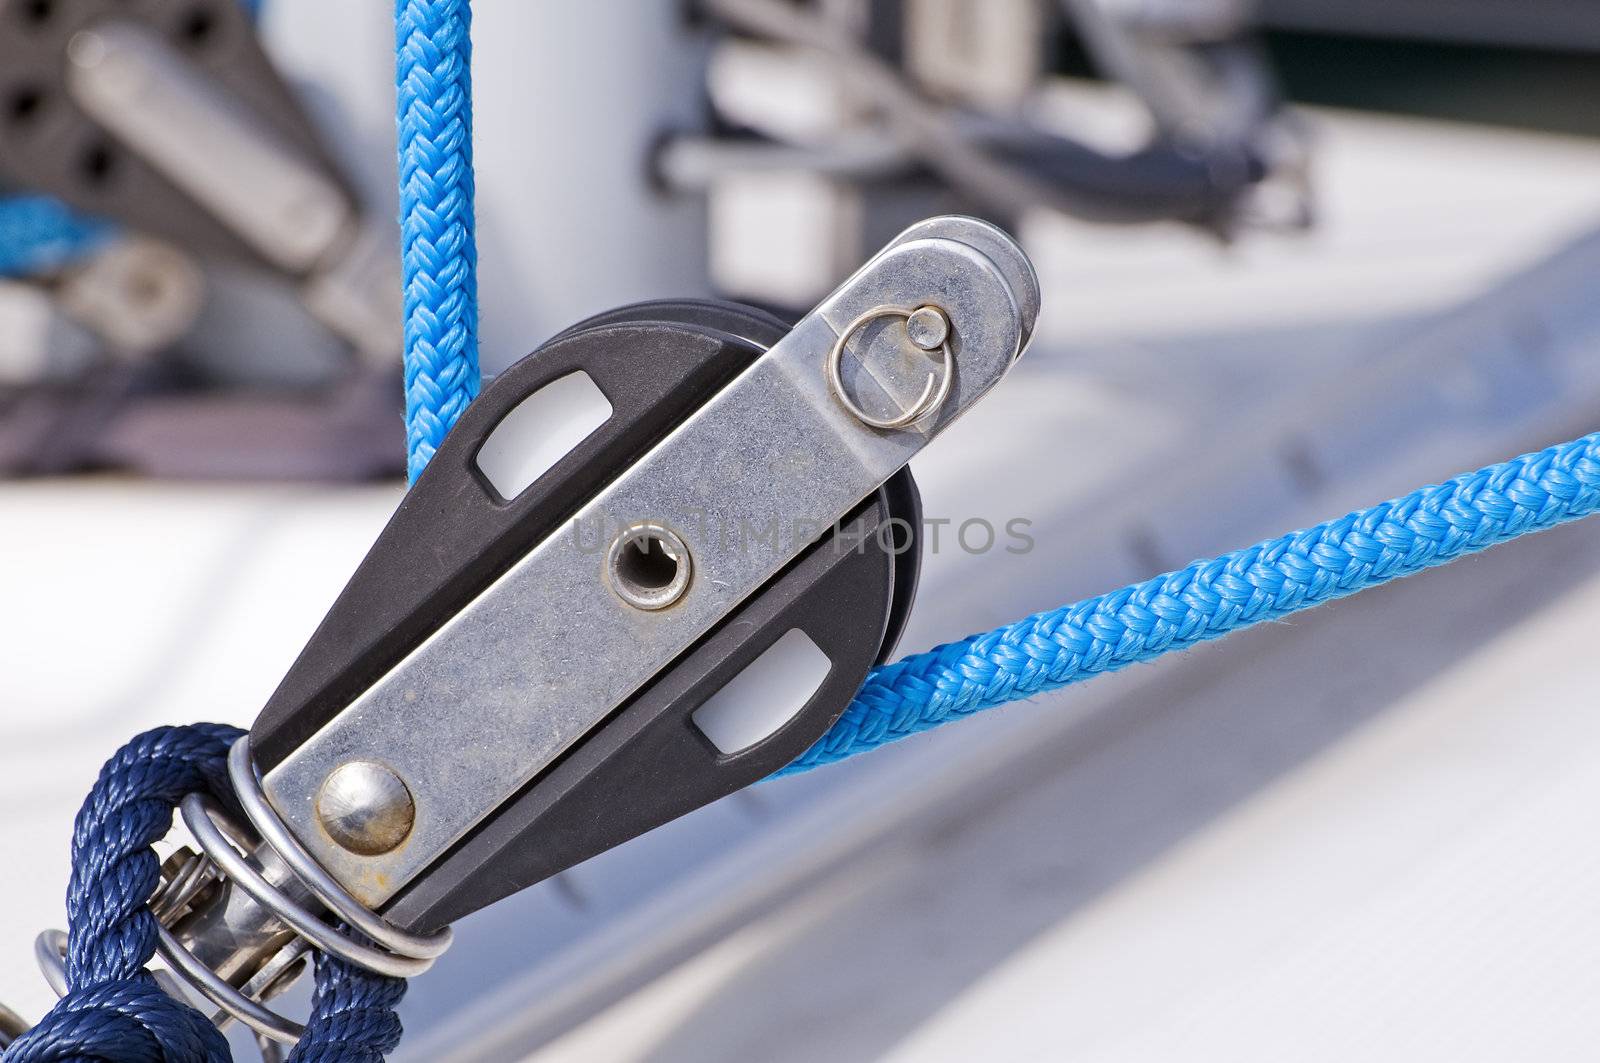 Sailing pulley by lebanmax